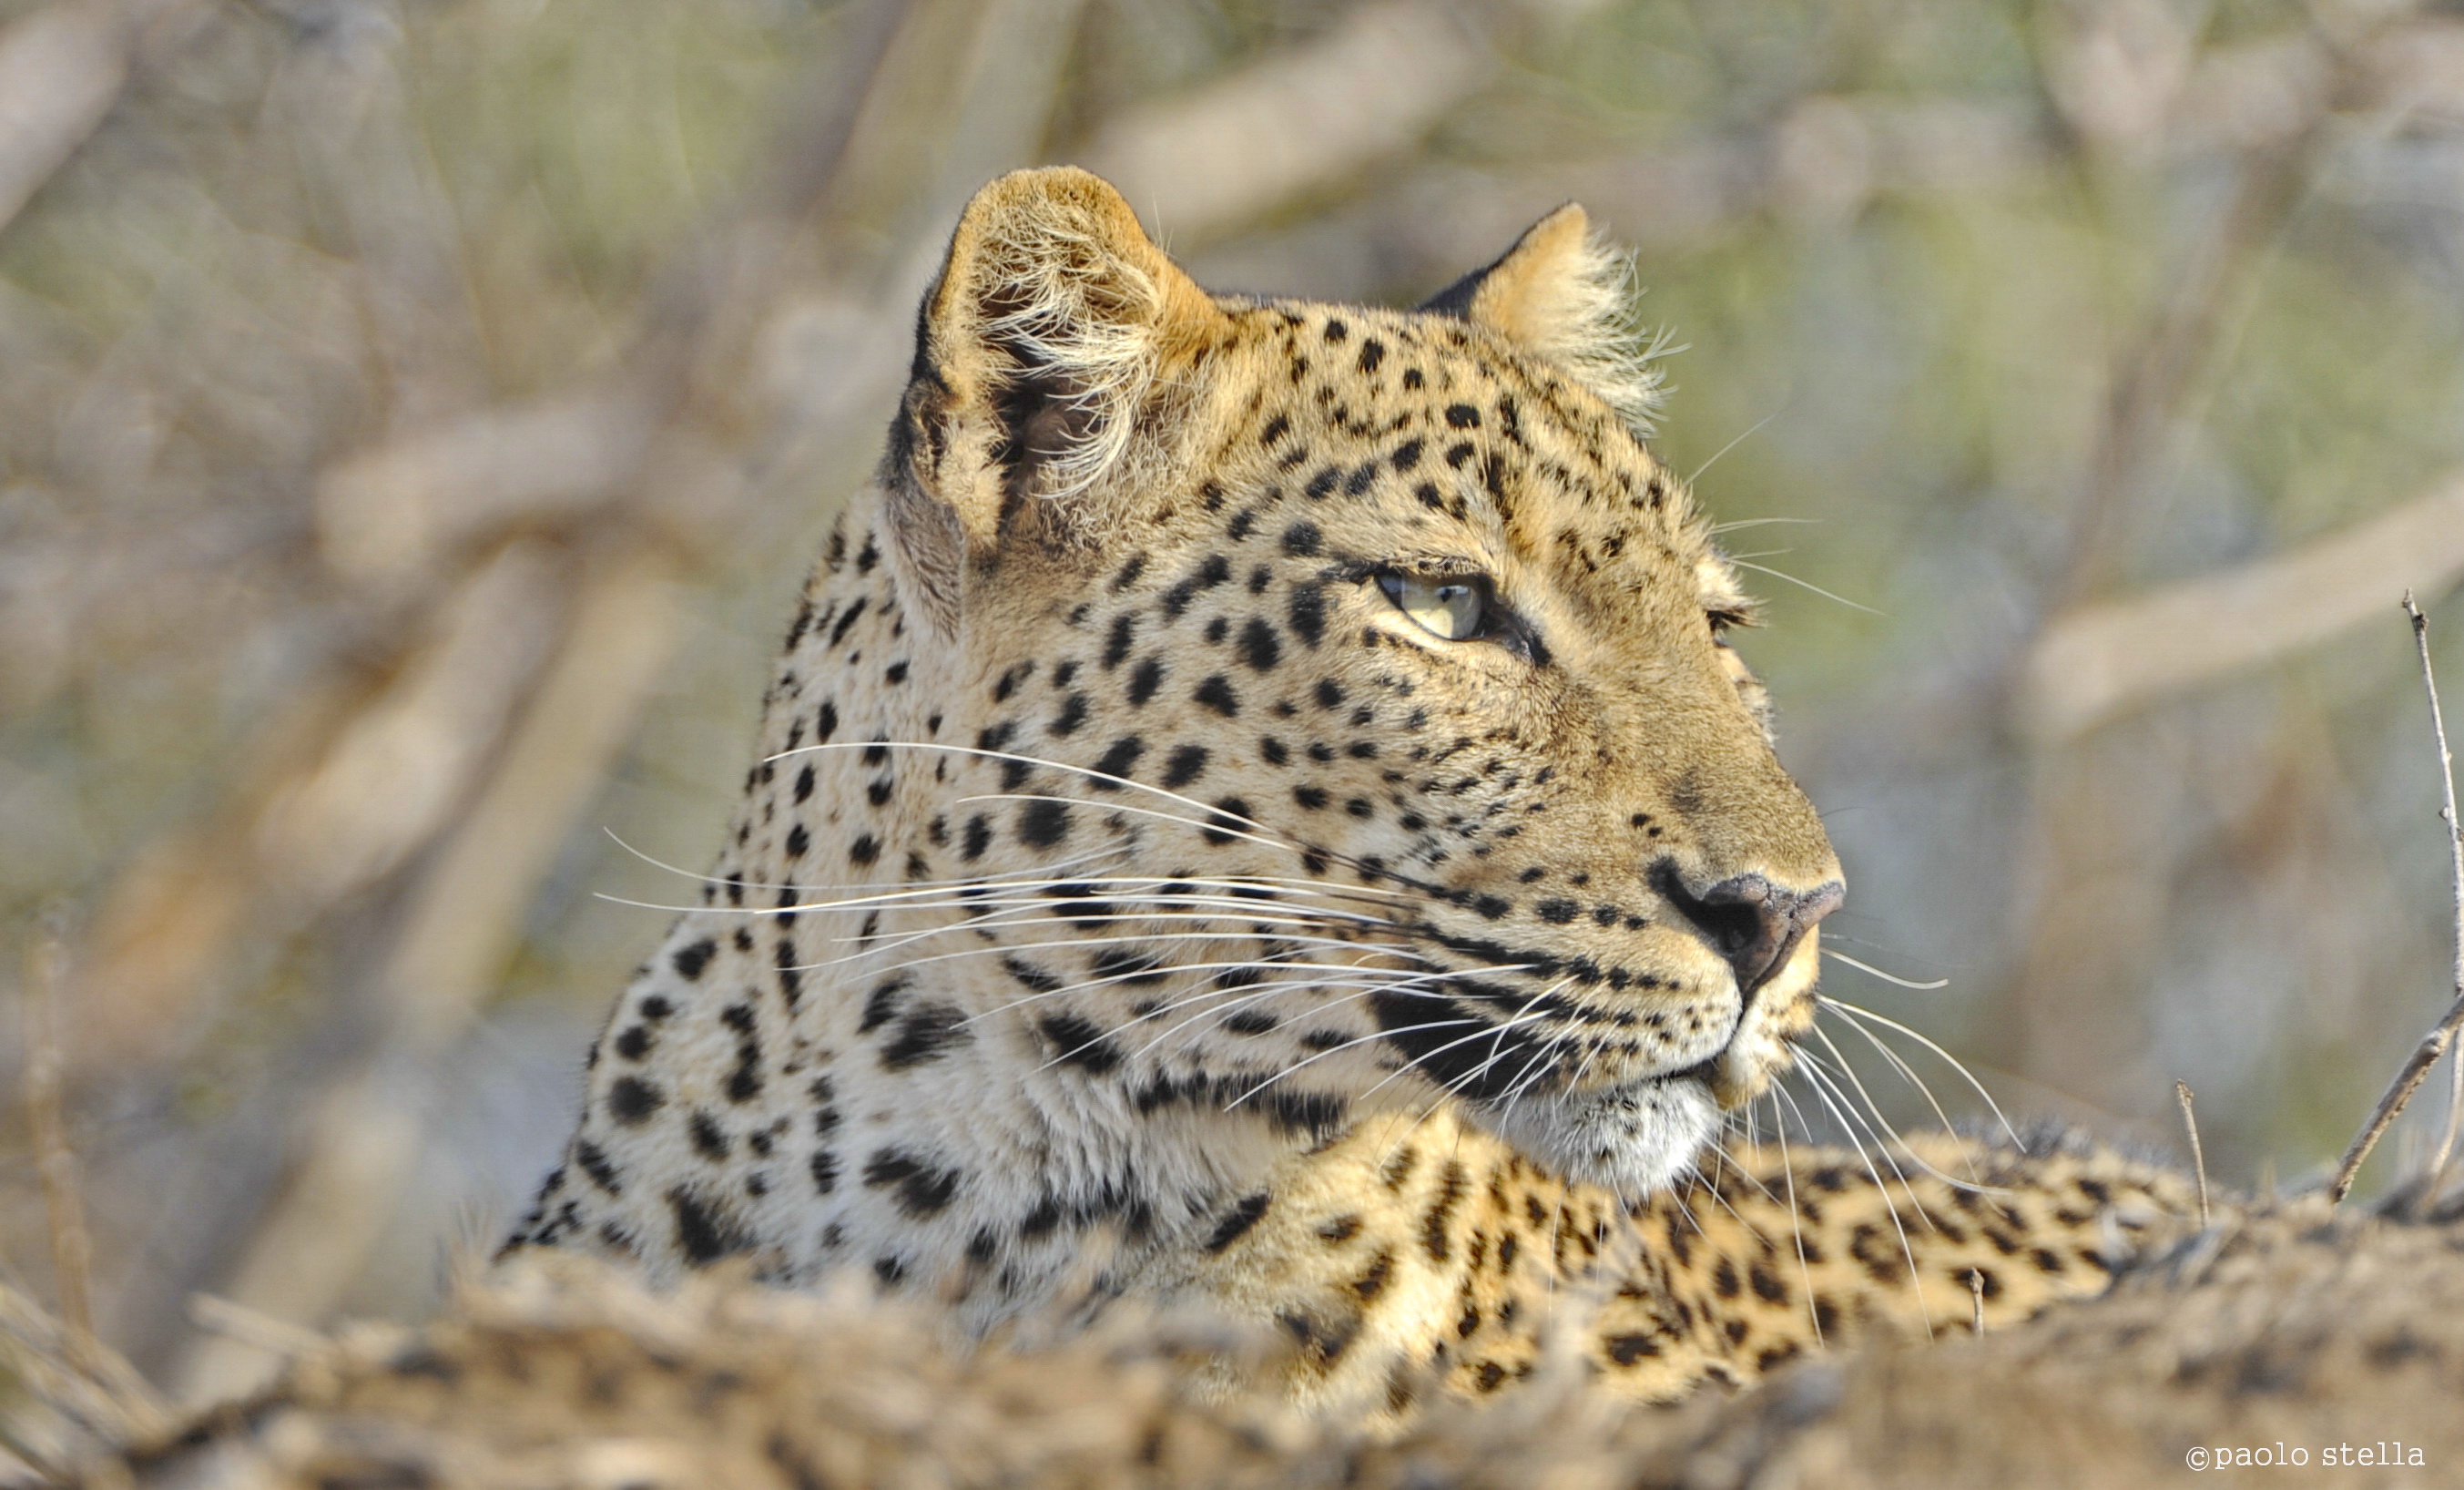 leopard close-up at the sunset...